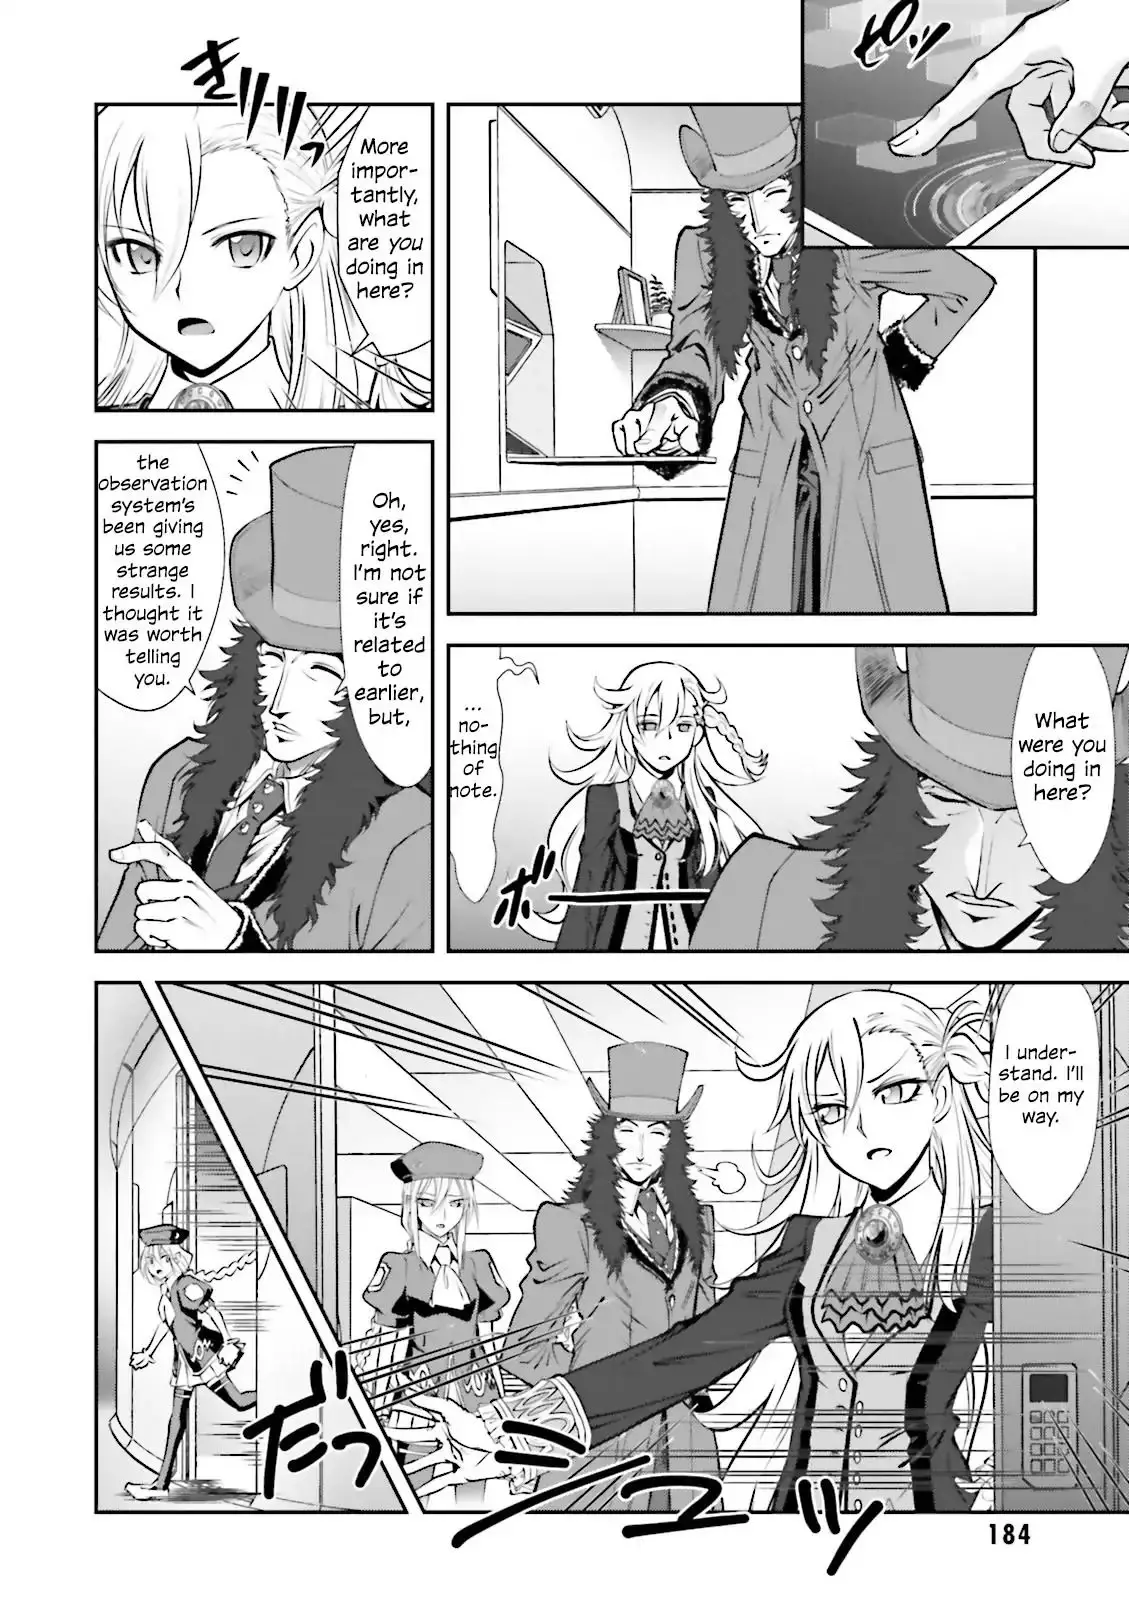 Melty Blood - Back Alley Alliance Nightmare - 5 page 22